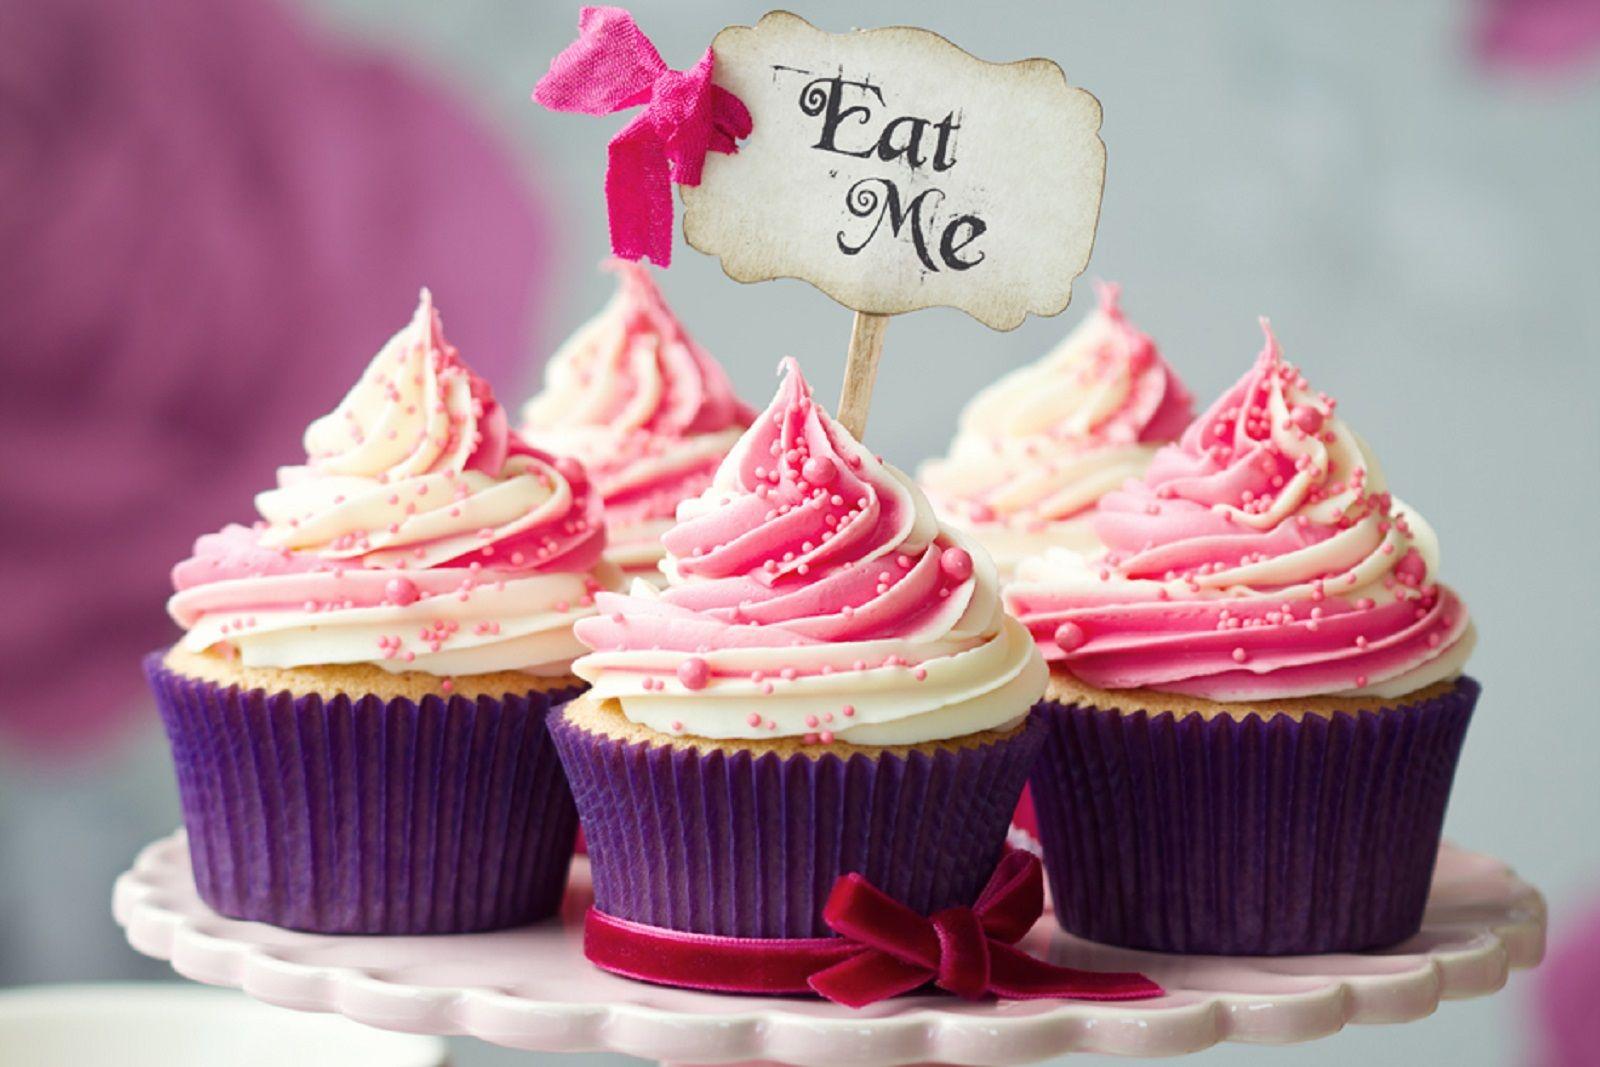 Love Cup cake Collection. Beautiful image HD Picture & Desktop